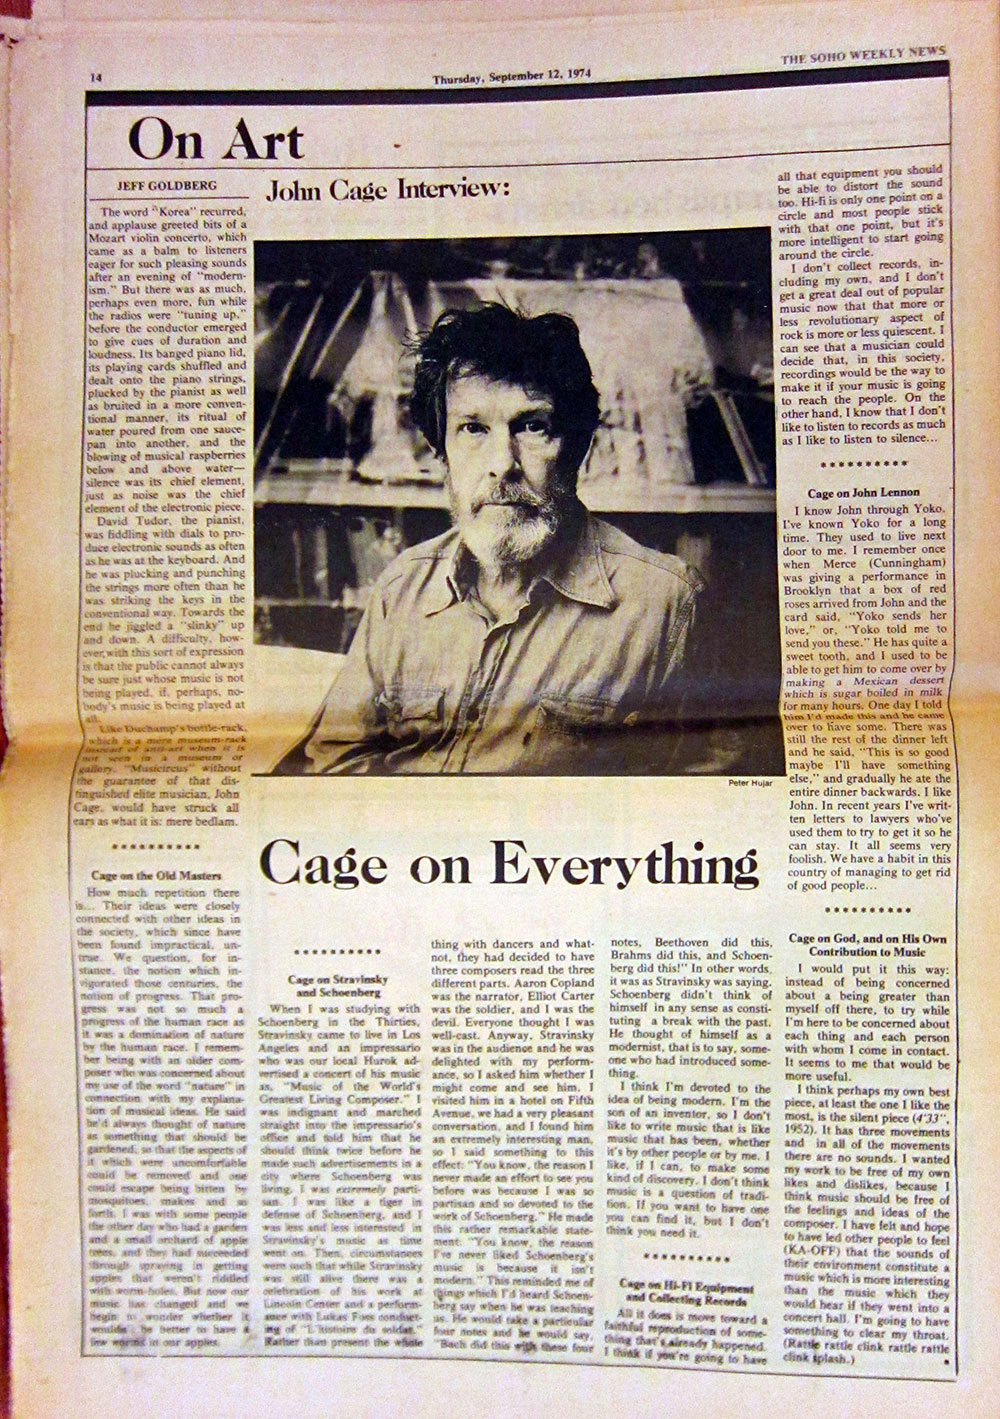 An interview with John Cage